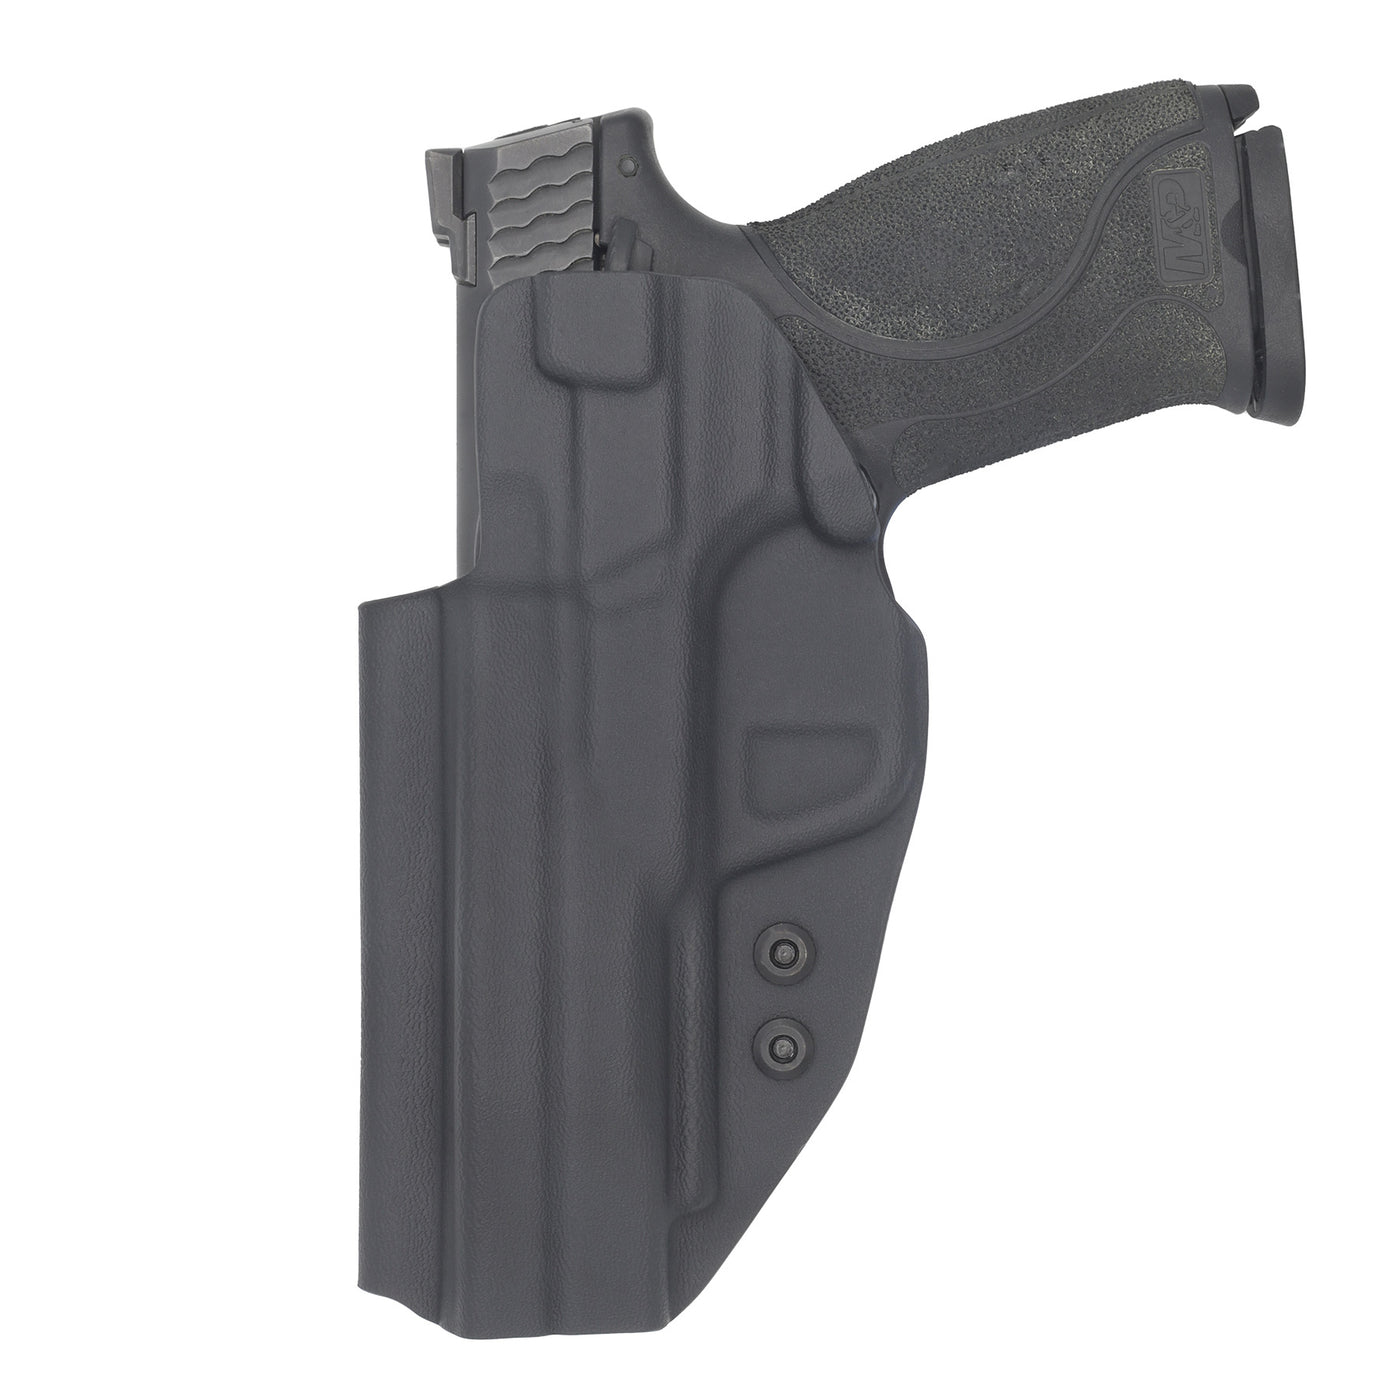 This is the back of the C&G Holsters covert series inside the waistband (IWB) holster for the Smith & Wesson M&P 9/40 4.25" in holstered position